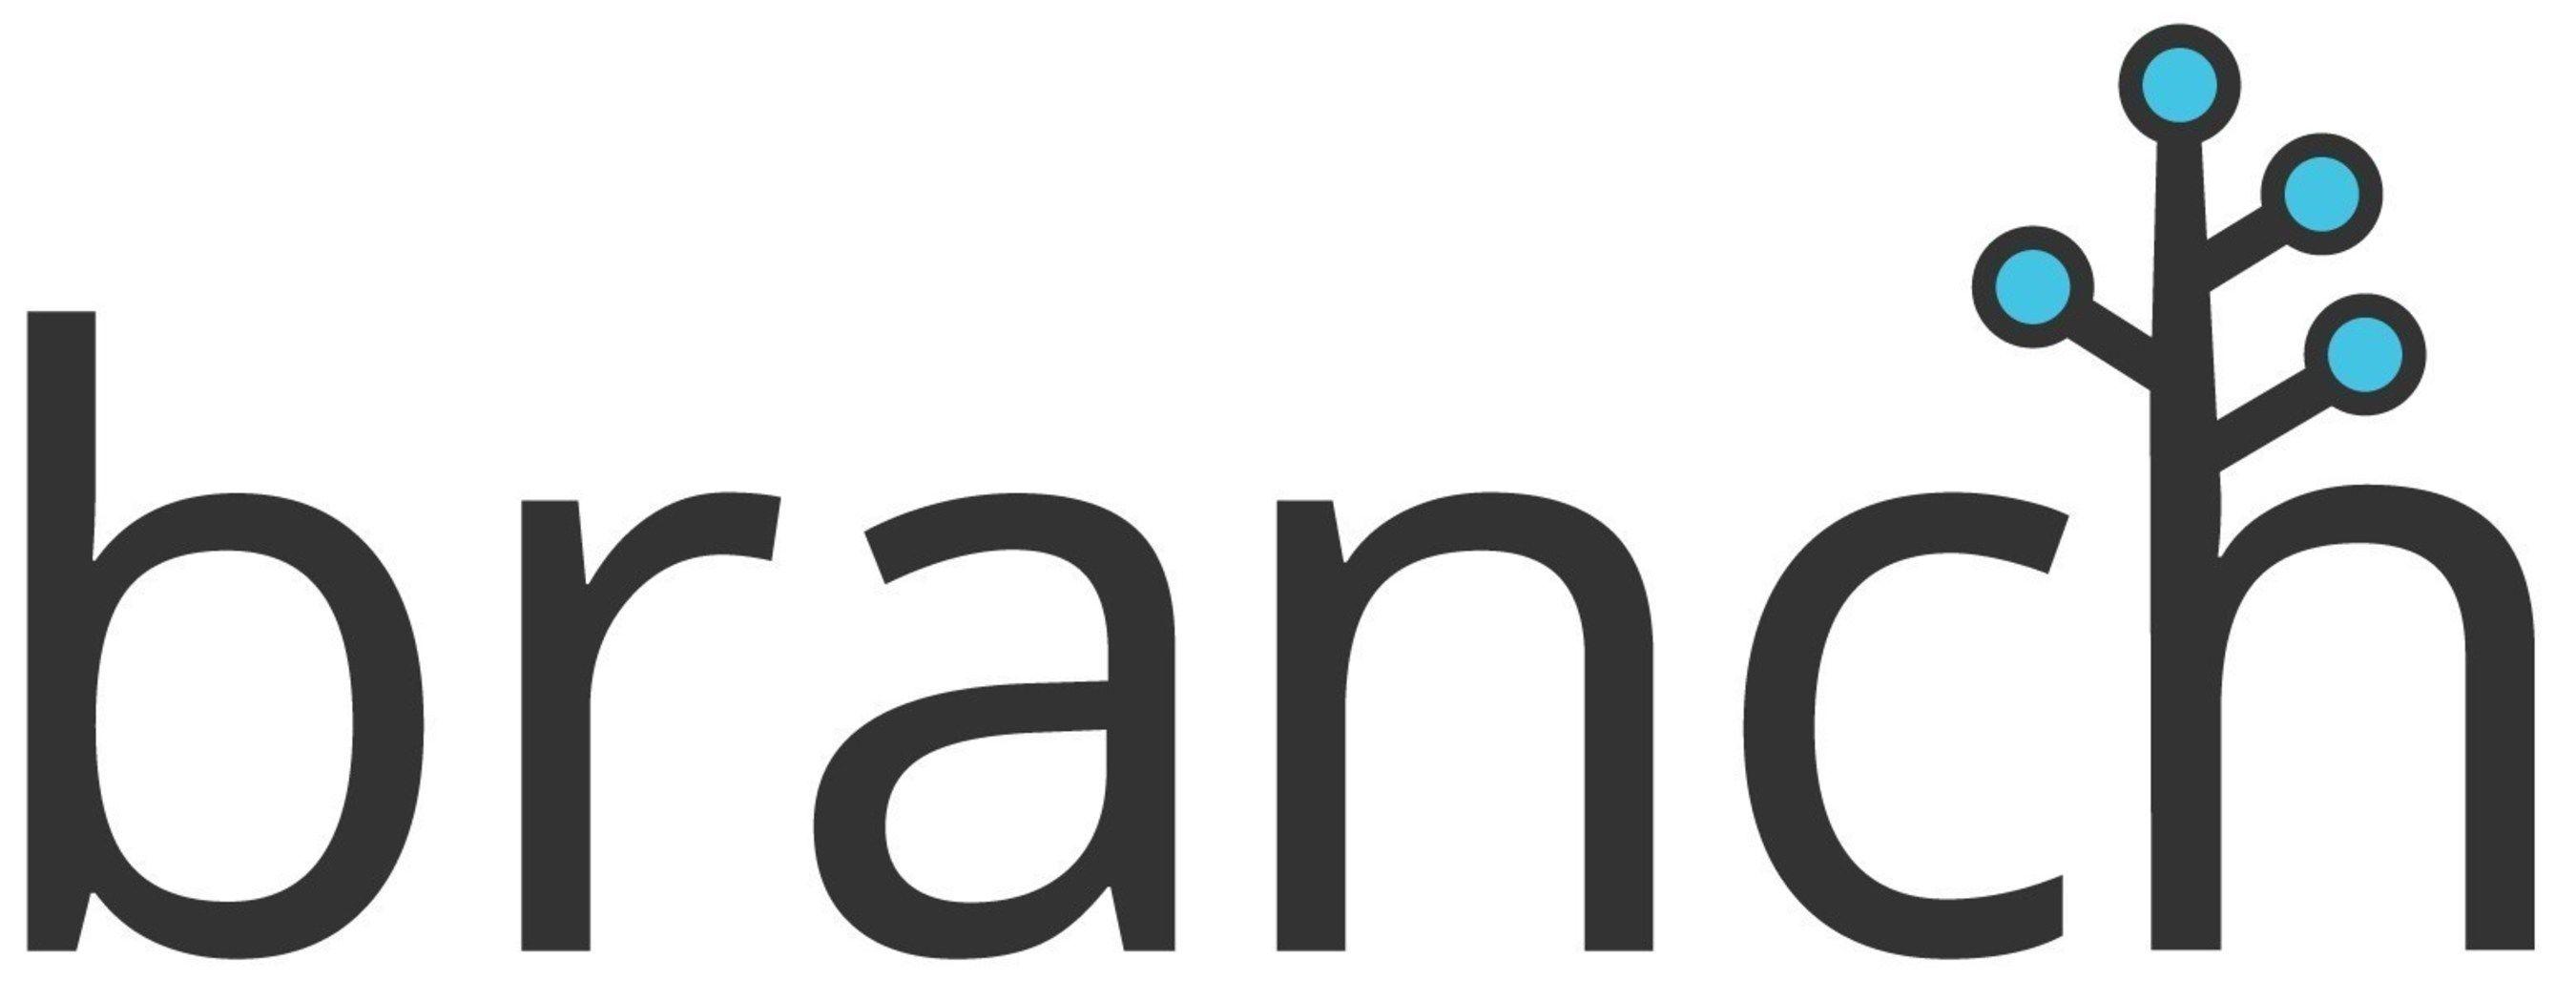 Branch.io Logo - Branch Metrics Raises $35 Million as it Becomes the Mobile Industry ...